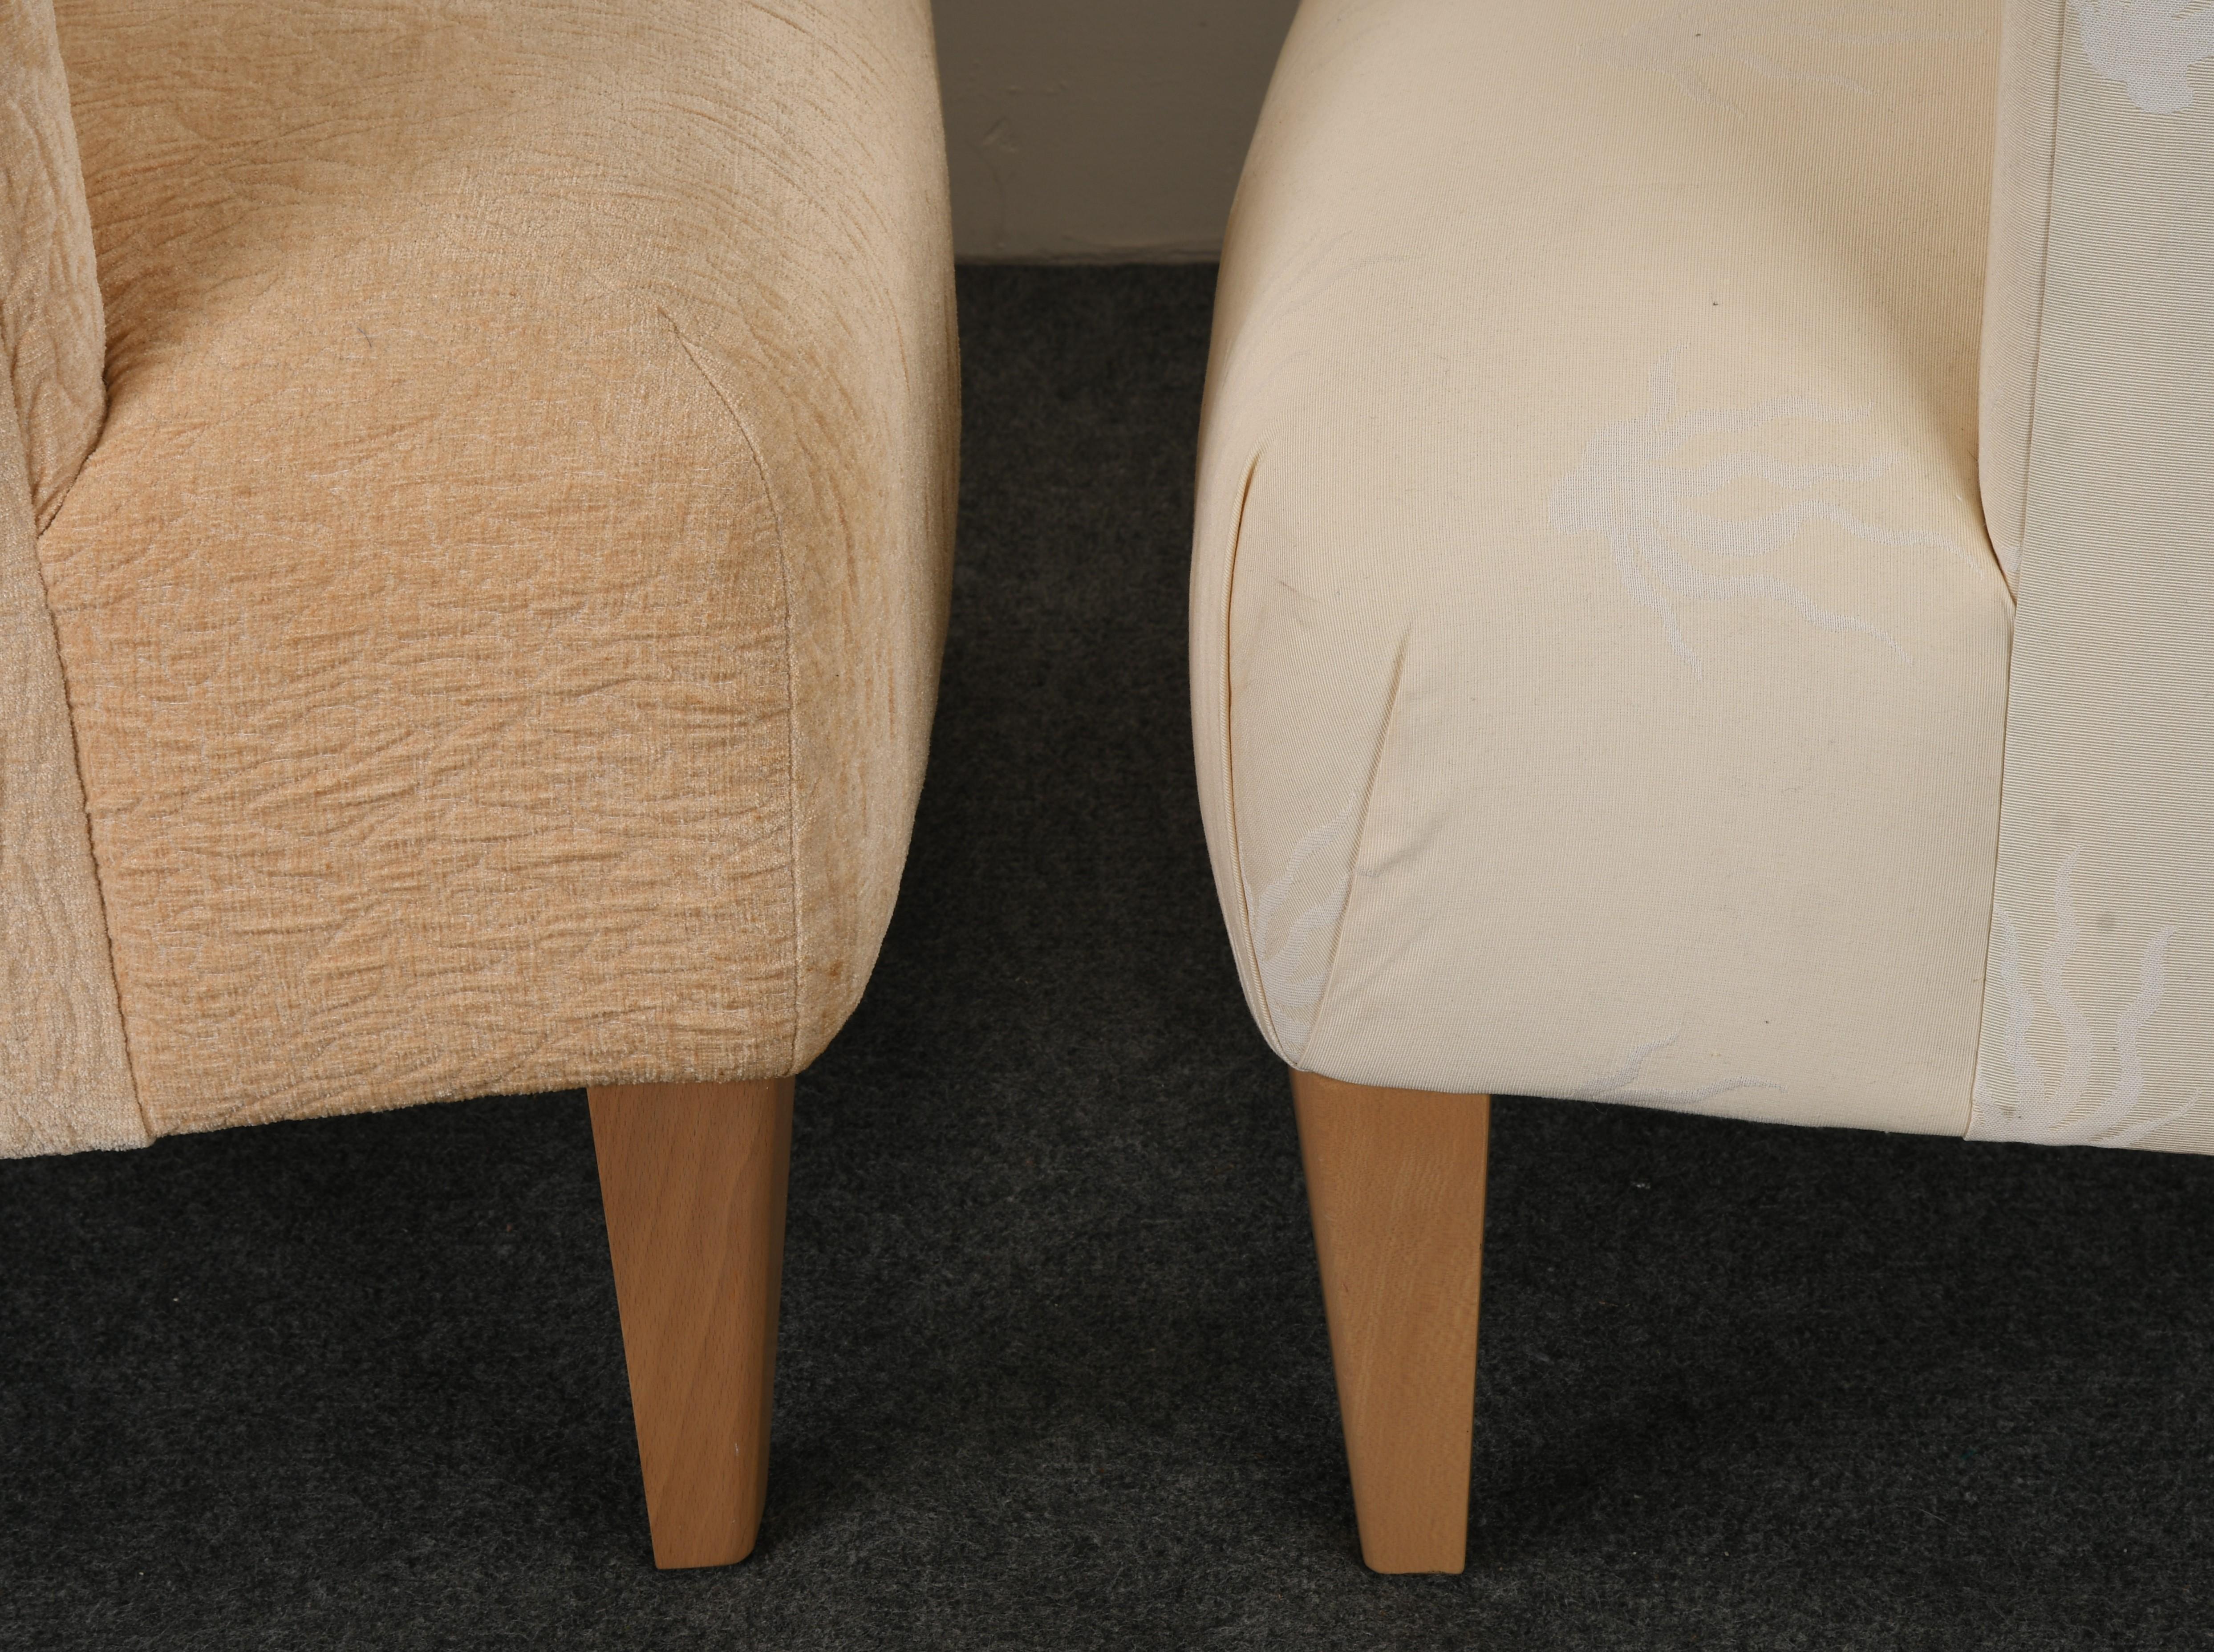 Upholstery Pair of 